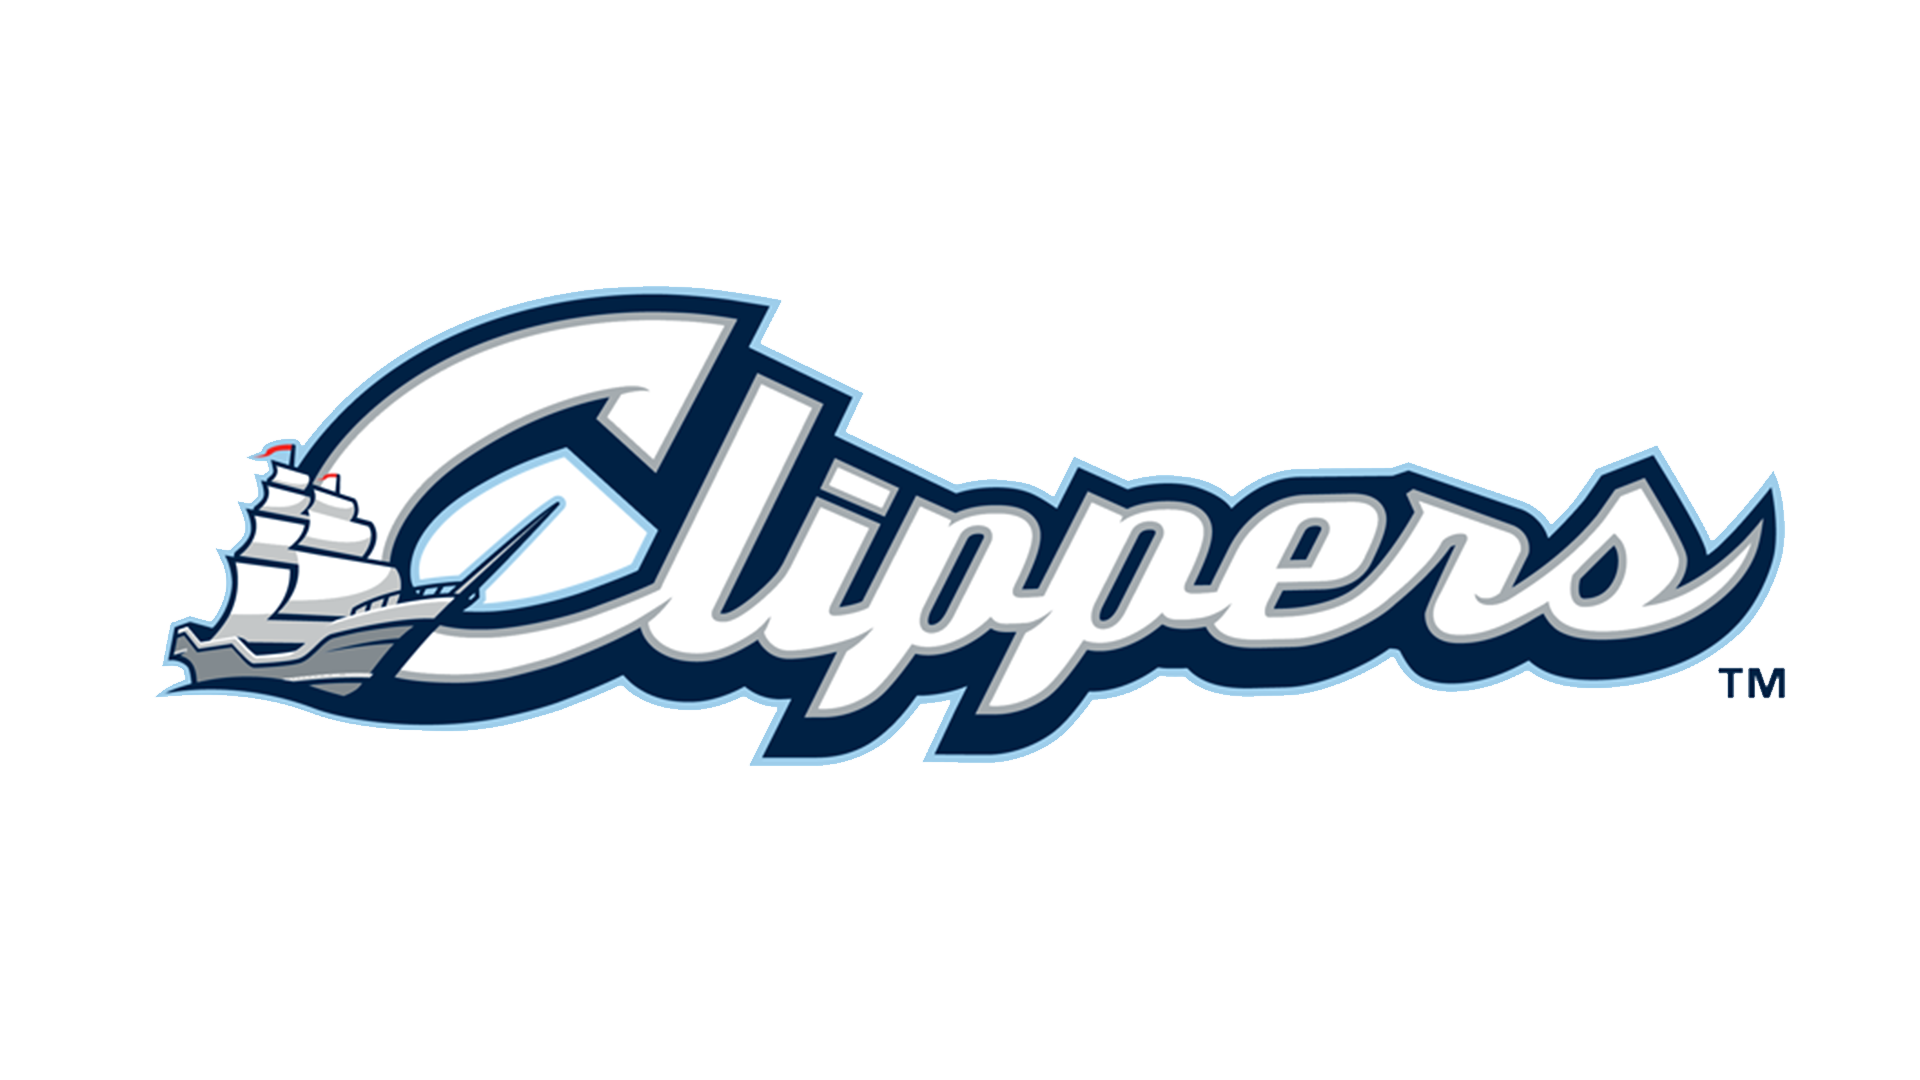 Meaning Columbus Clippers logo and symbol.